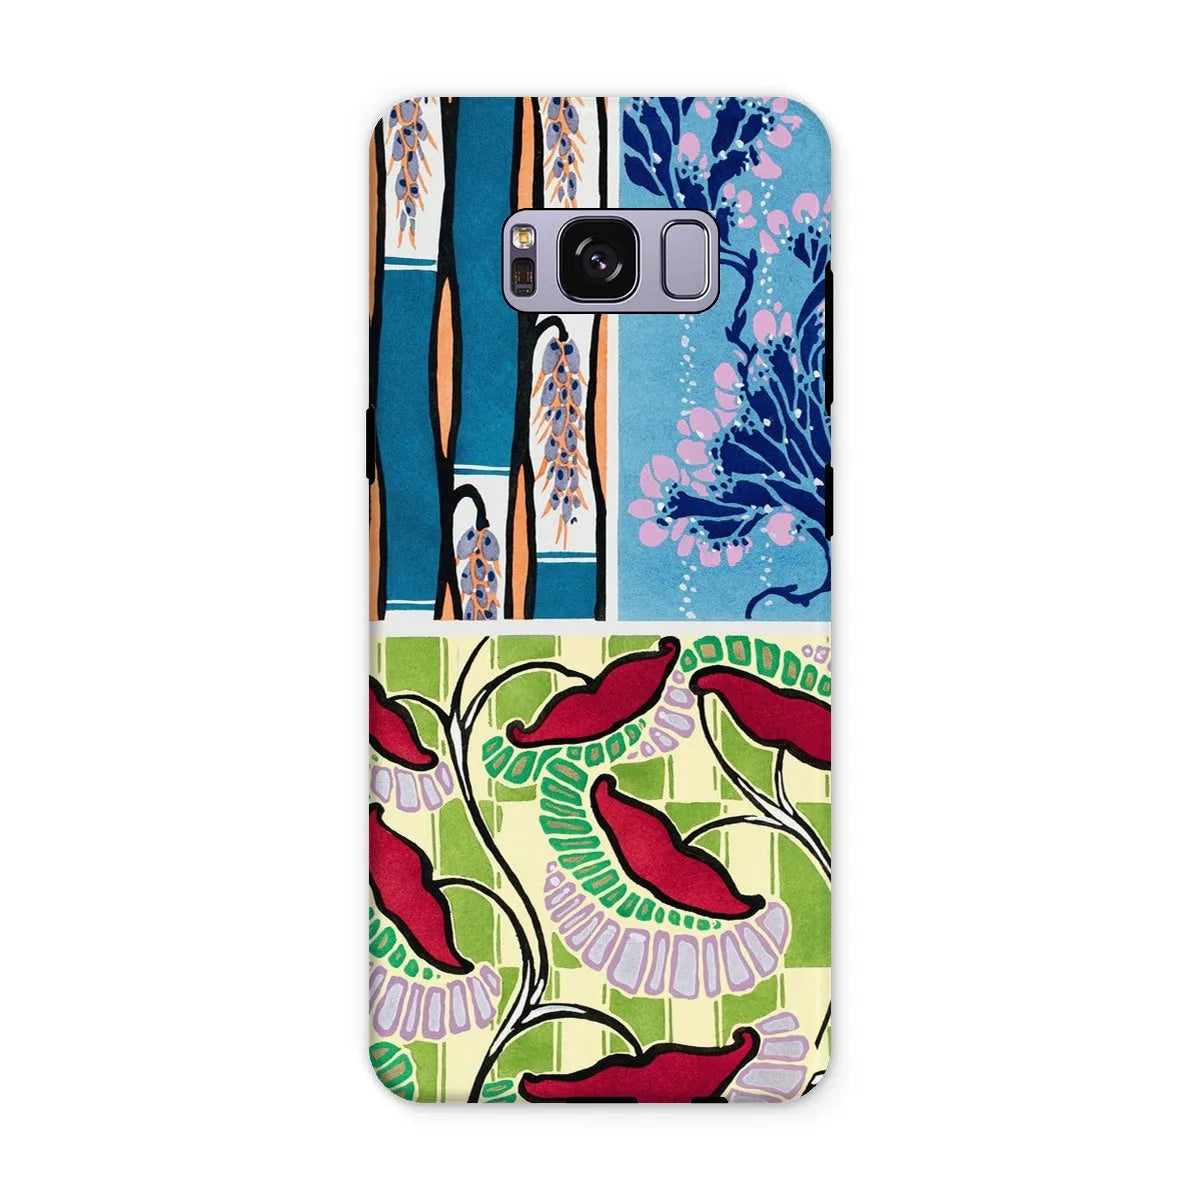 Floral Kitsch Aesthetic Art Phone Case - E.a. Séguy - Samsung Galaxy S8 Plus / Matte - Mobile Phone Cases - Aesthetic